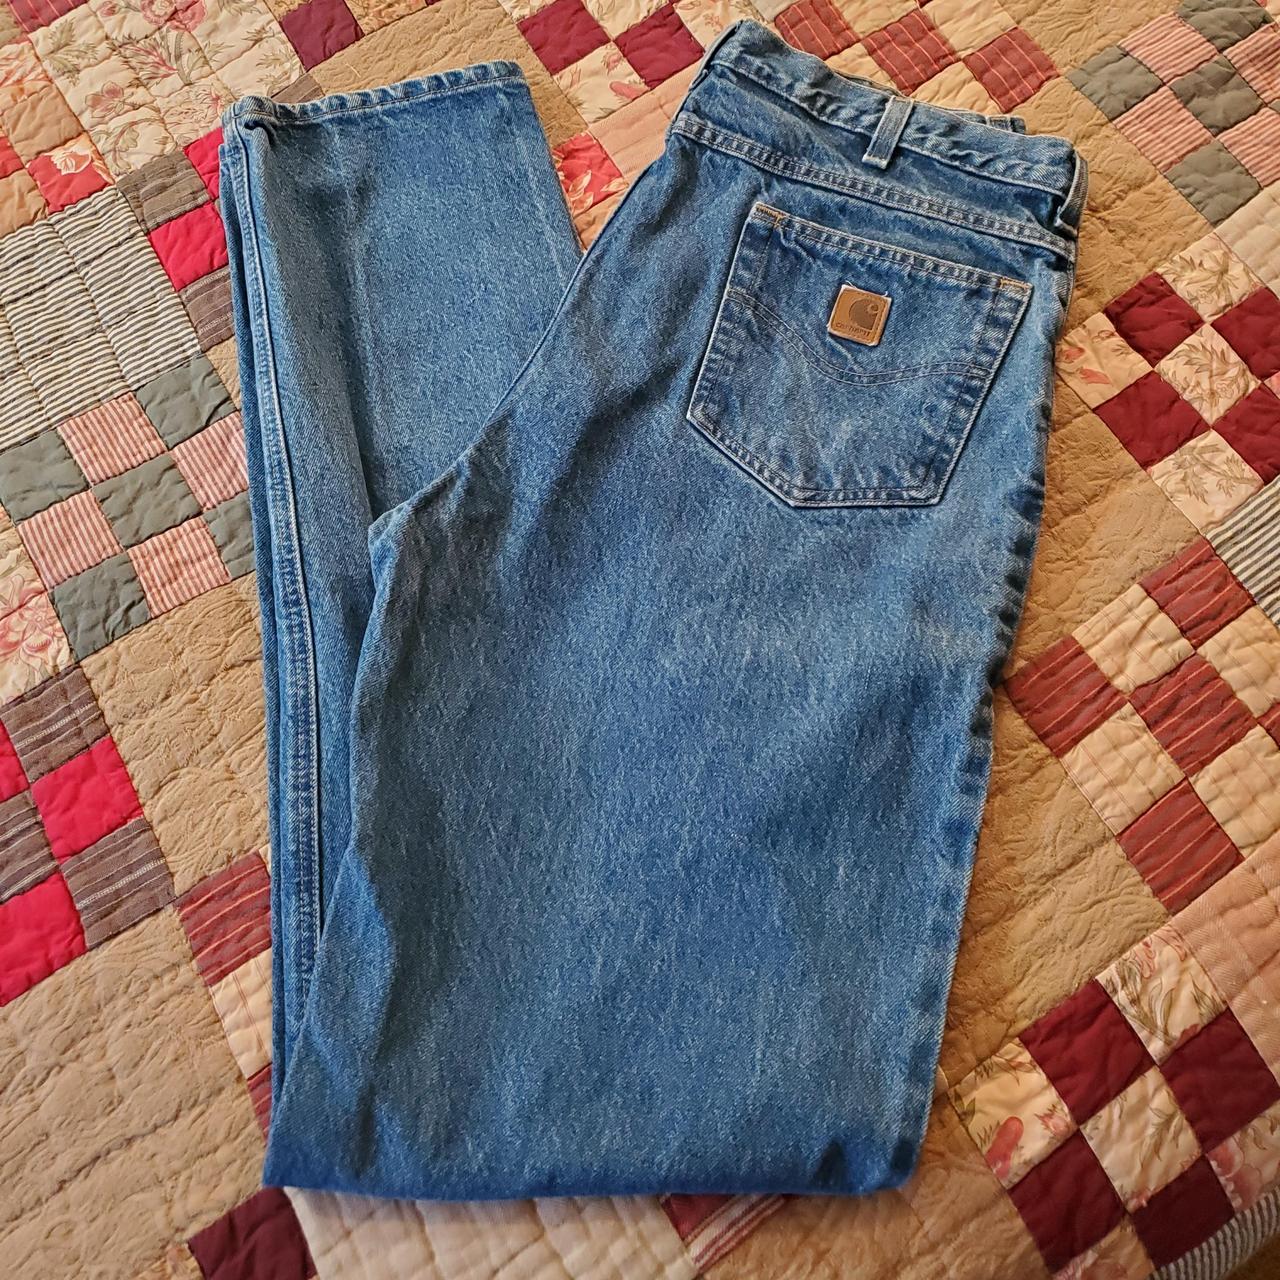 Carhartt WIP Men's Blue and Gold Jeans